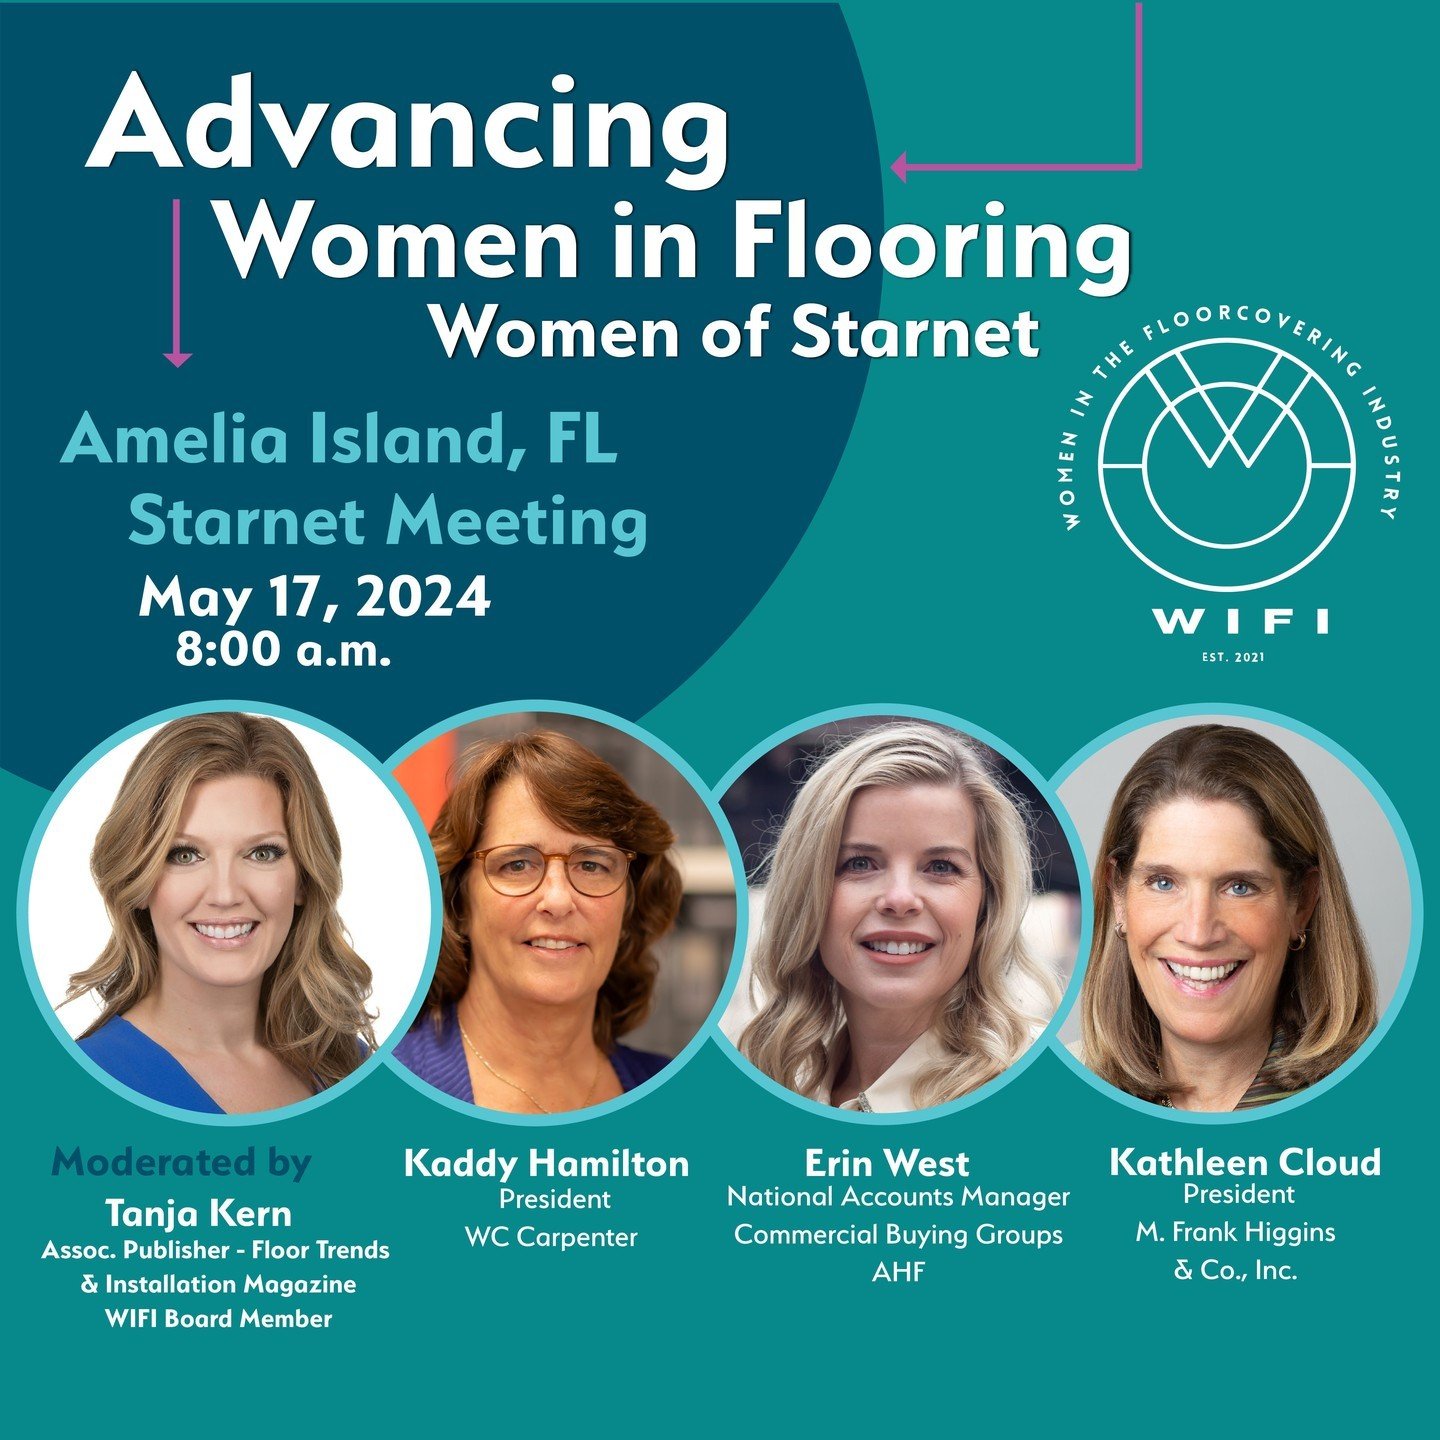 Going to the @starnetflooring meeting? Join WIFI for a panel on Advancing Women in Flooring! The group will explore topics including speaking up, elevating others, recruitment of women, and personal leadership. 

When: Friday, May 17 at 8 a.m. EST
Re